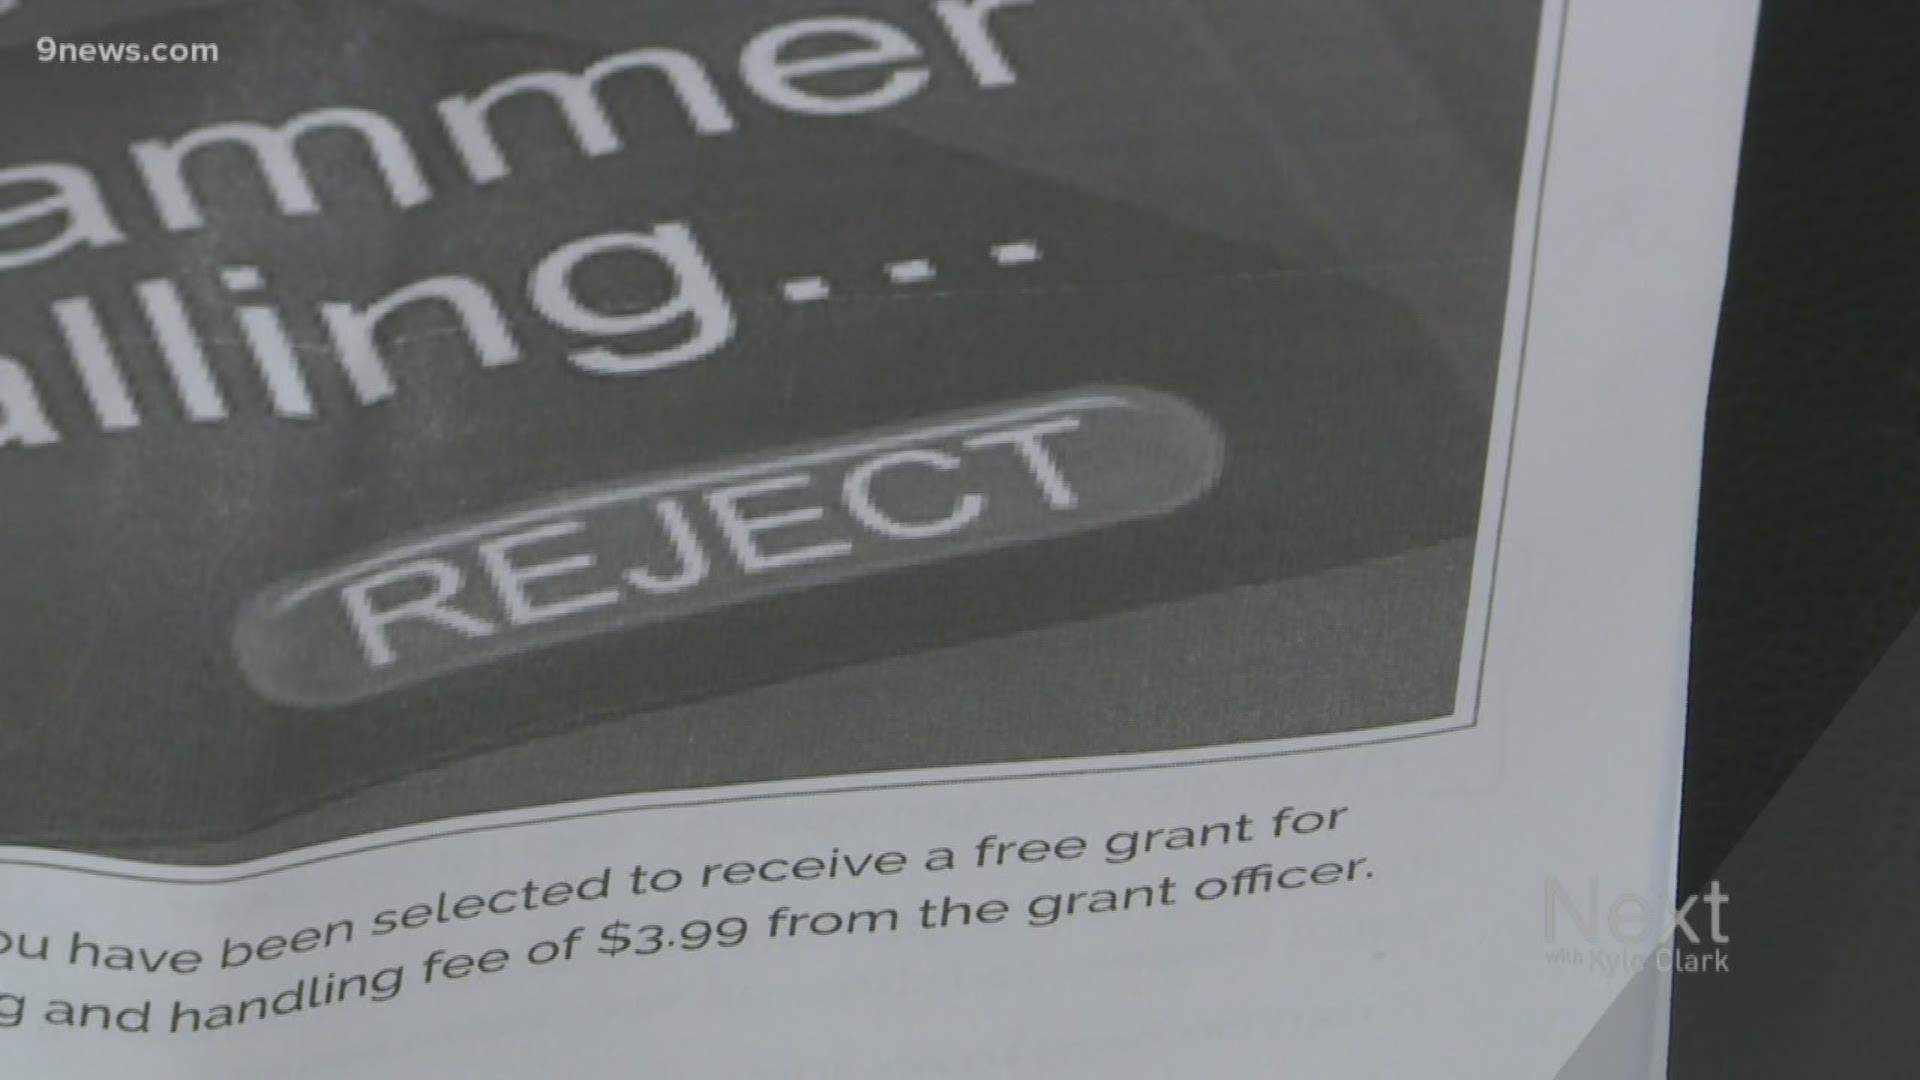 The scammers claim that if the person makes three payments of $300, their student loans will be forgiven.